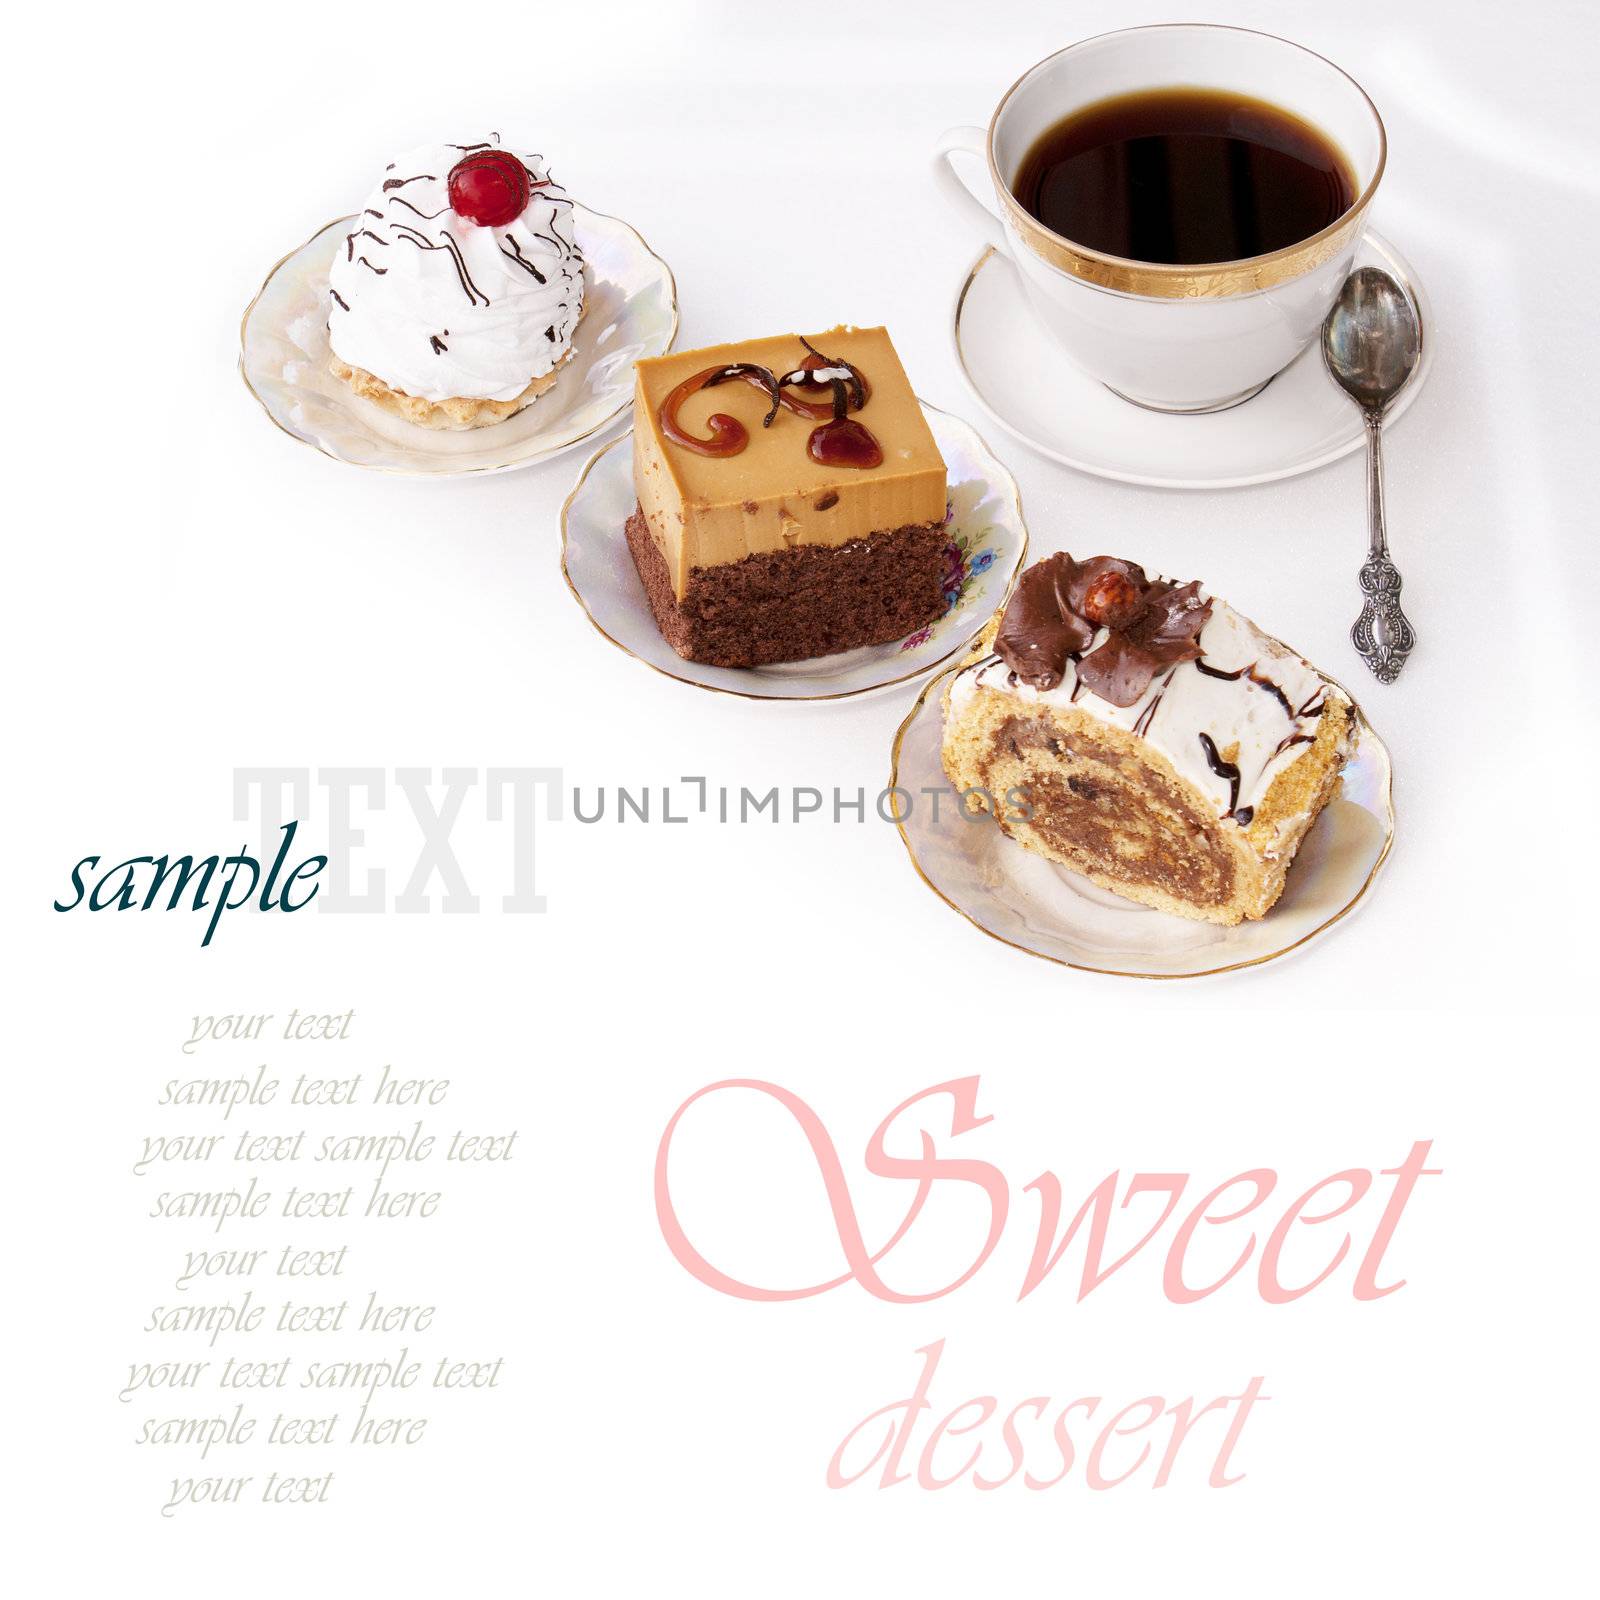 Sweet biscuit fresh dessert and morning black coffee